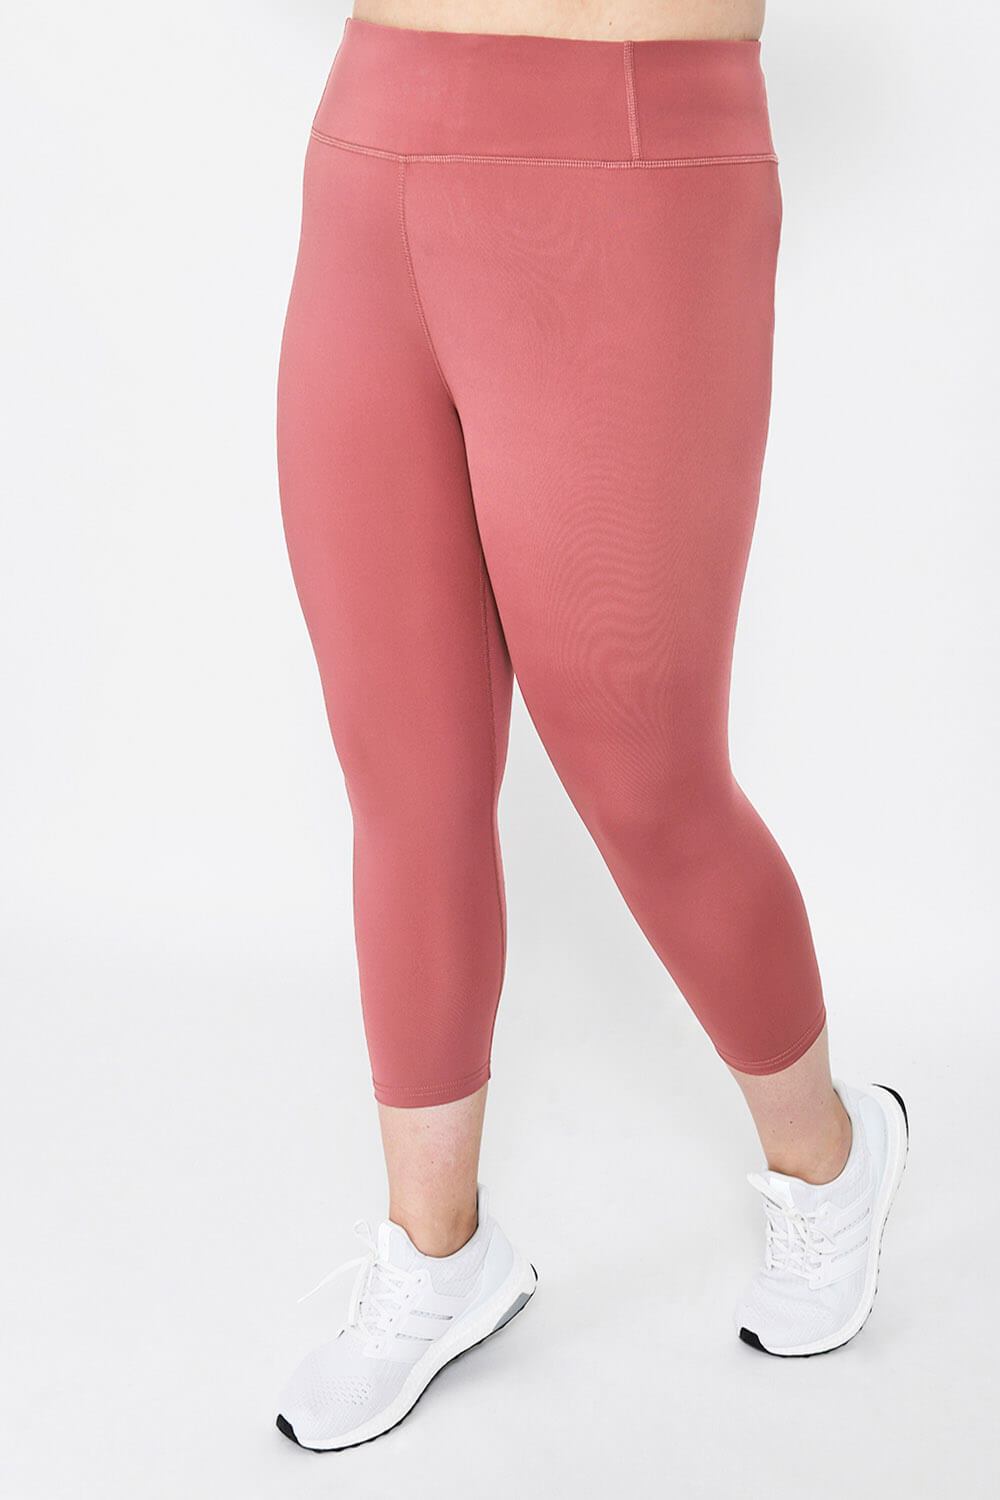 Focus Plus Size Cropped Dusty Pink Sports Leggings